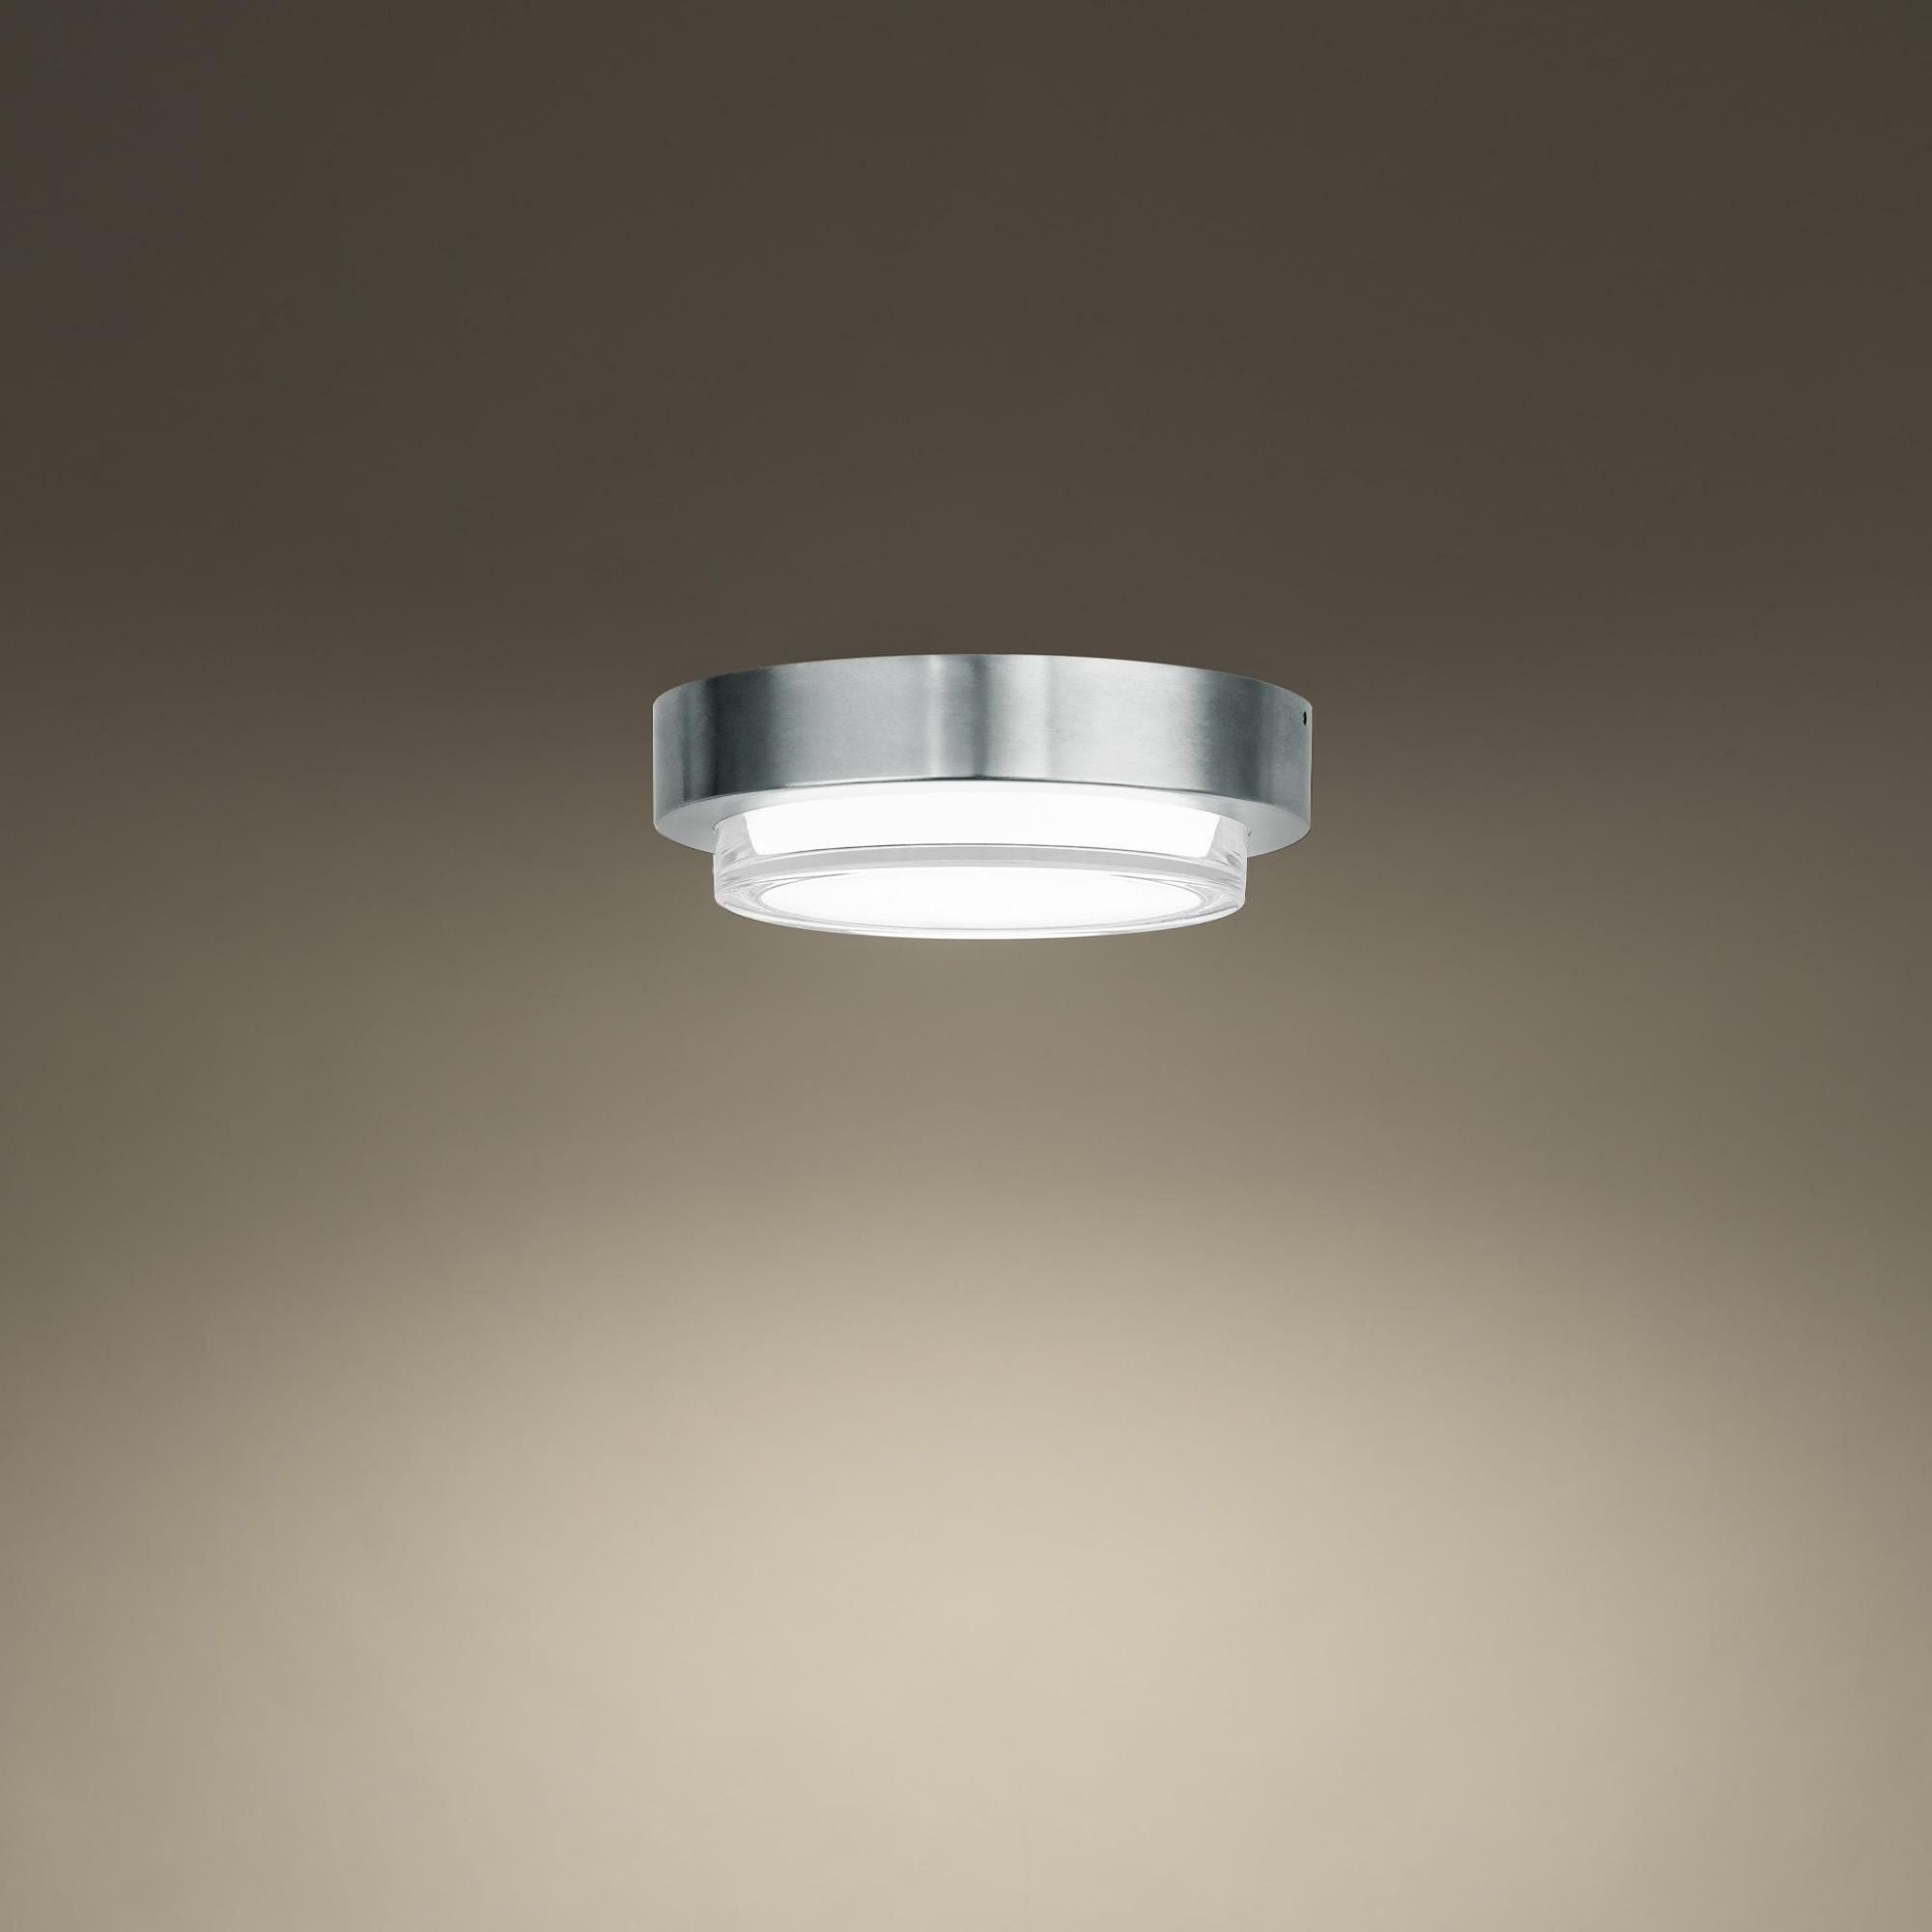 Kind 8in LED Round Indoor or Outdoor Flush Mount 3-CCT 2700K-3000K-3500K Set to 2700K in Stainless Steel